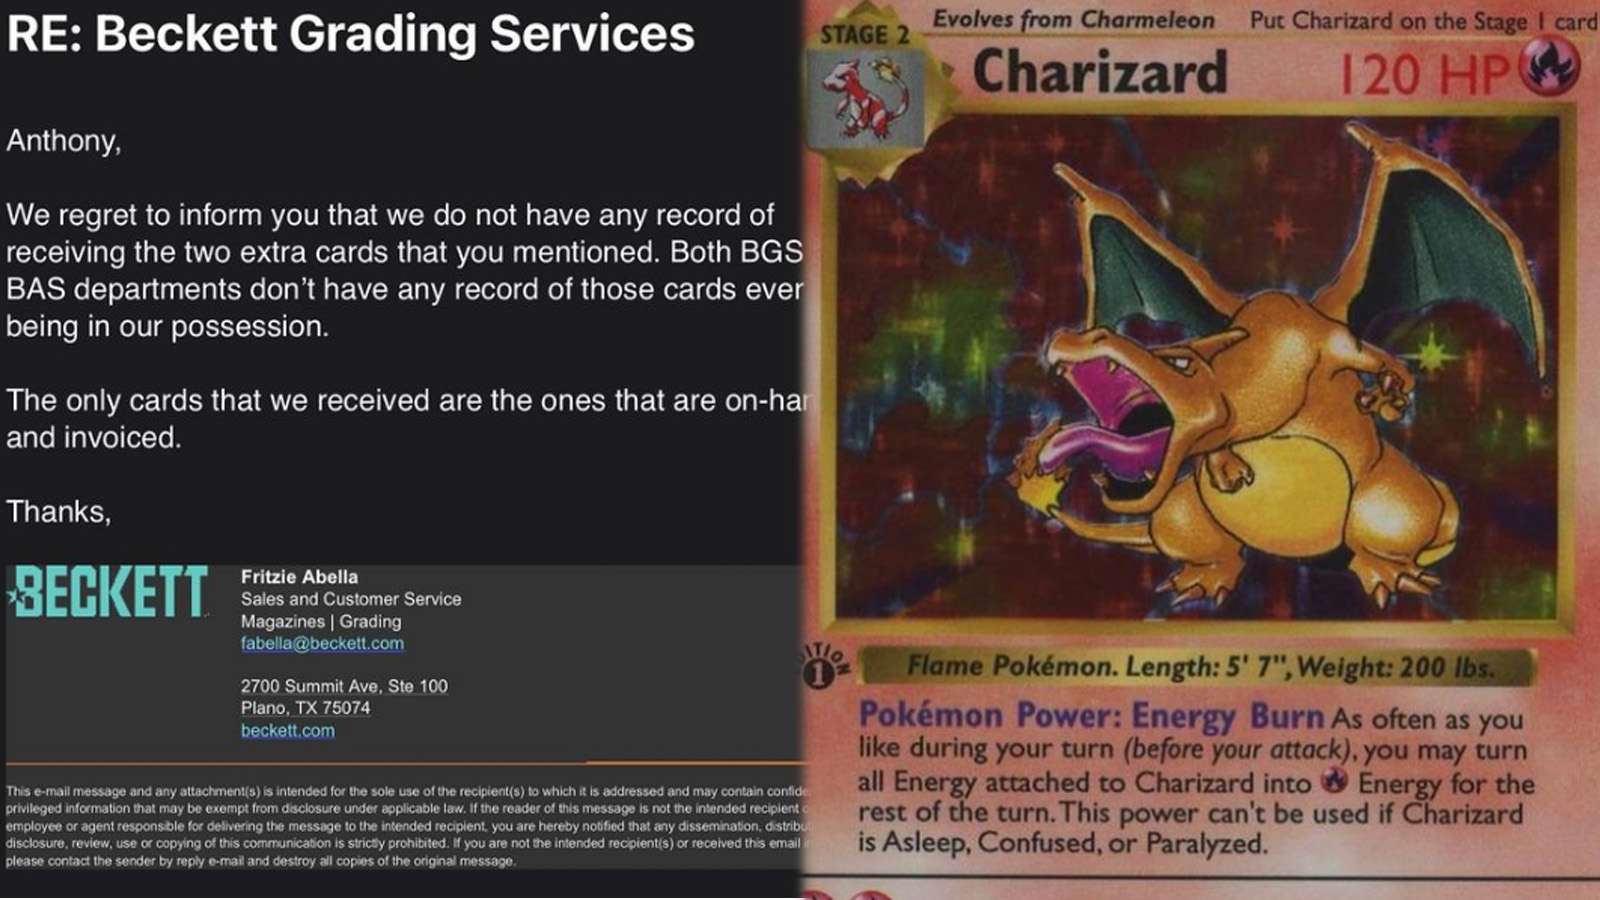 Collector claims Beckett lost 16K of Pokemon cards after sending them for a grading